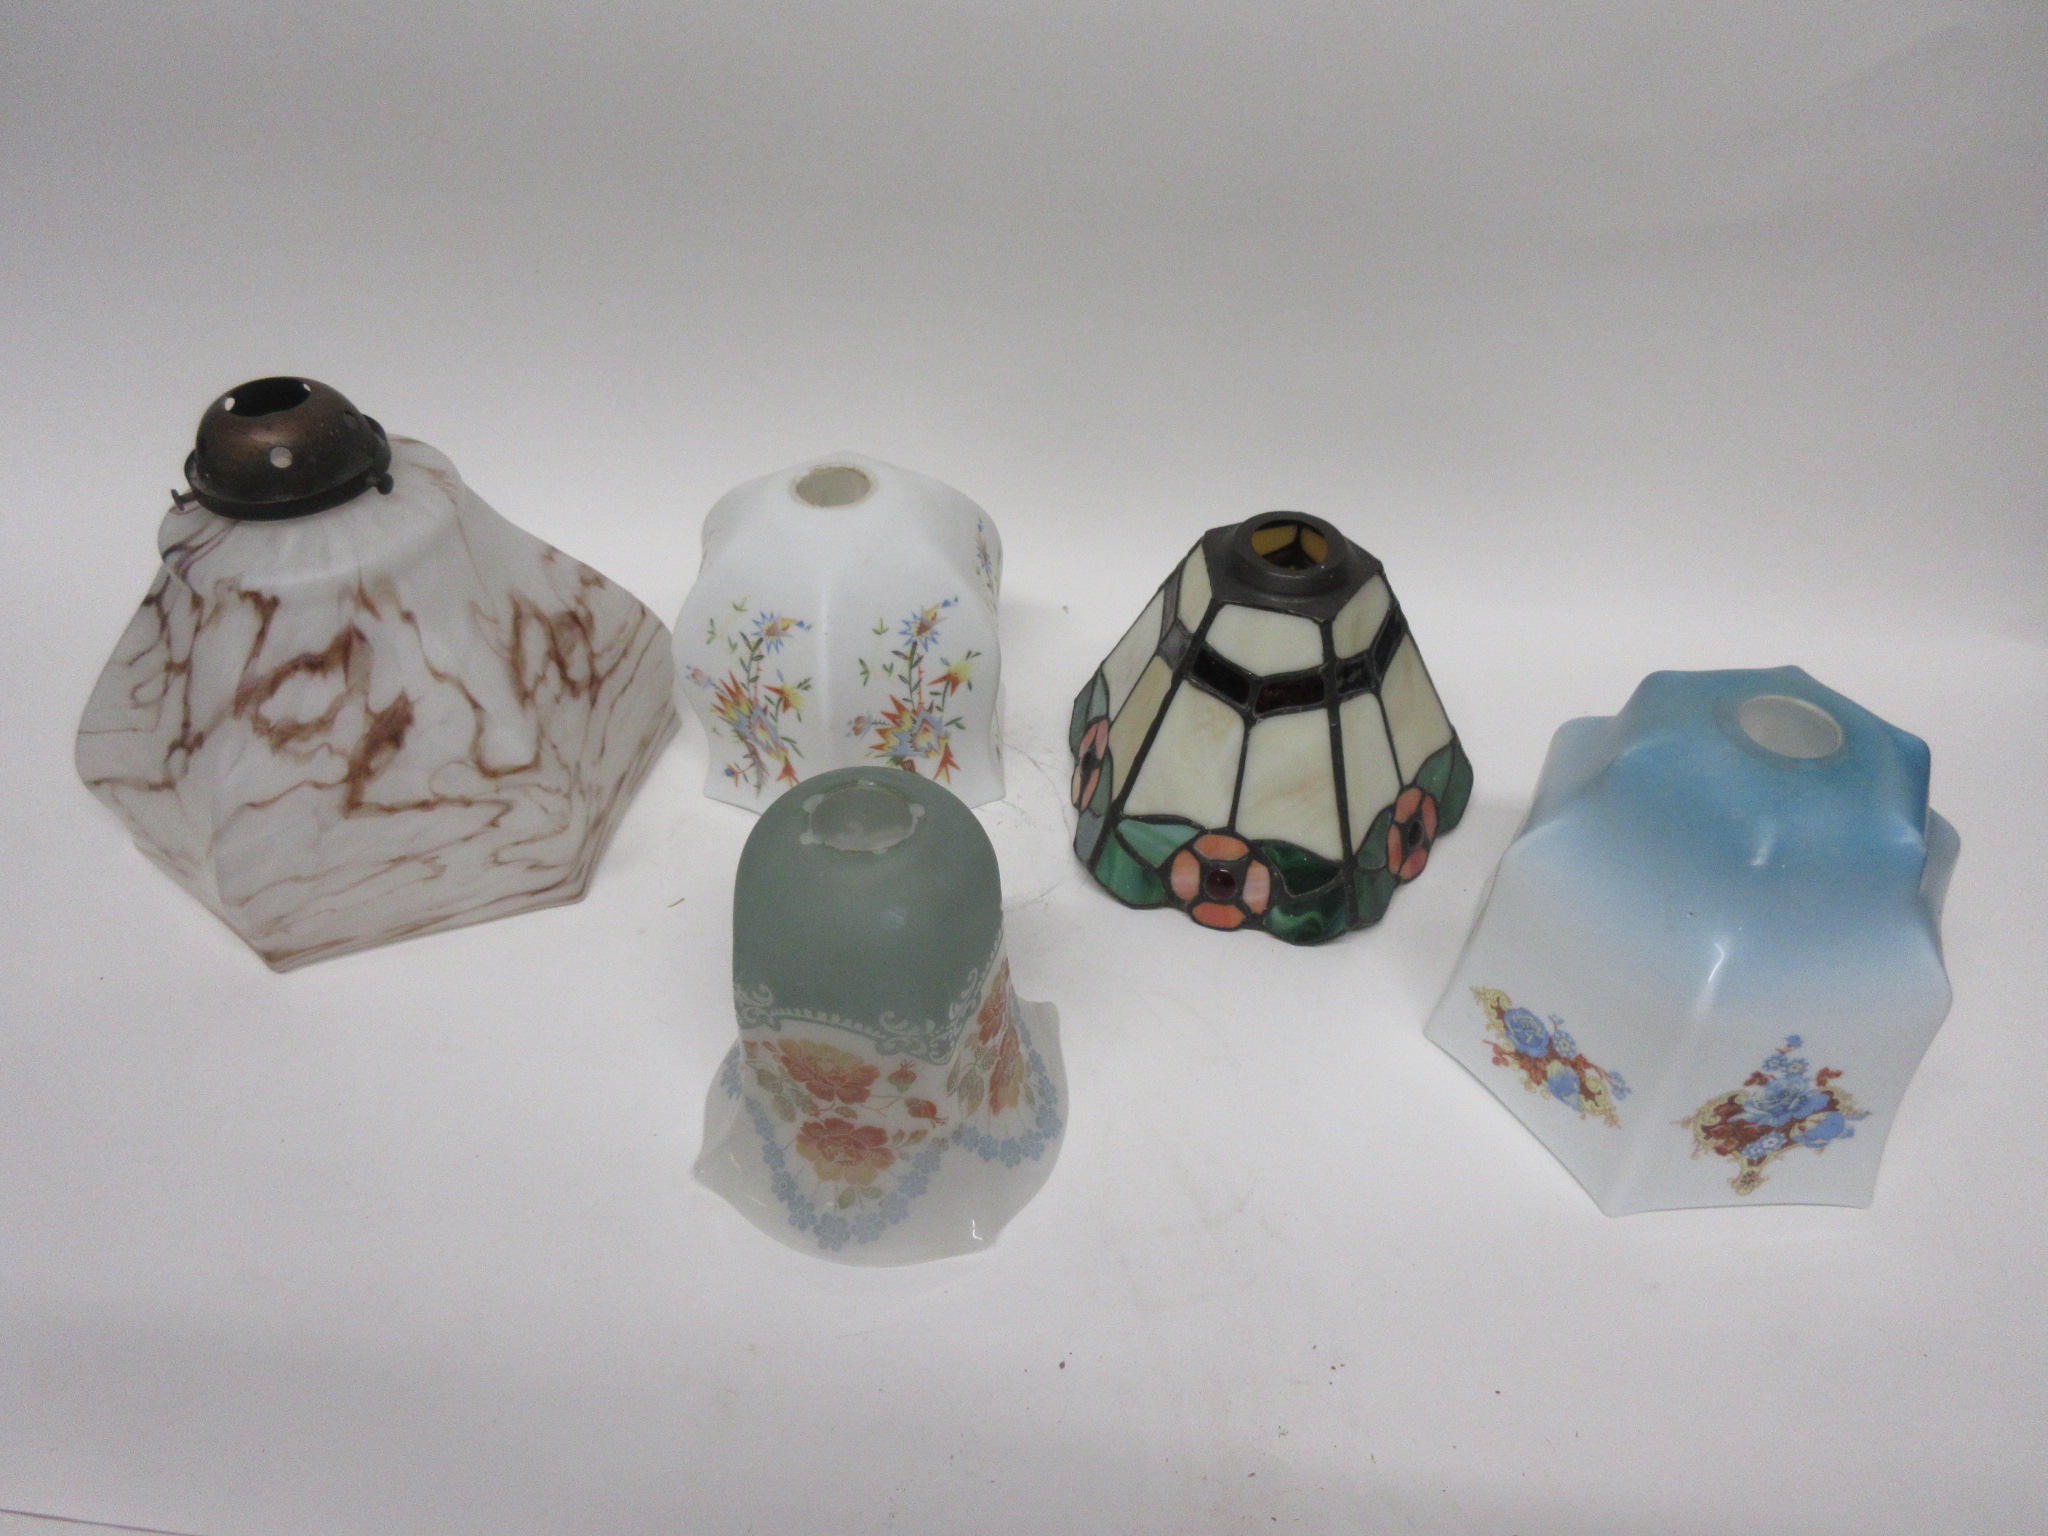 Group of five oil lamp shades, various sizes, one in Art Nouveau style with floral decoration